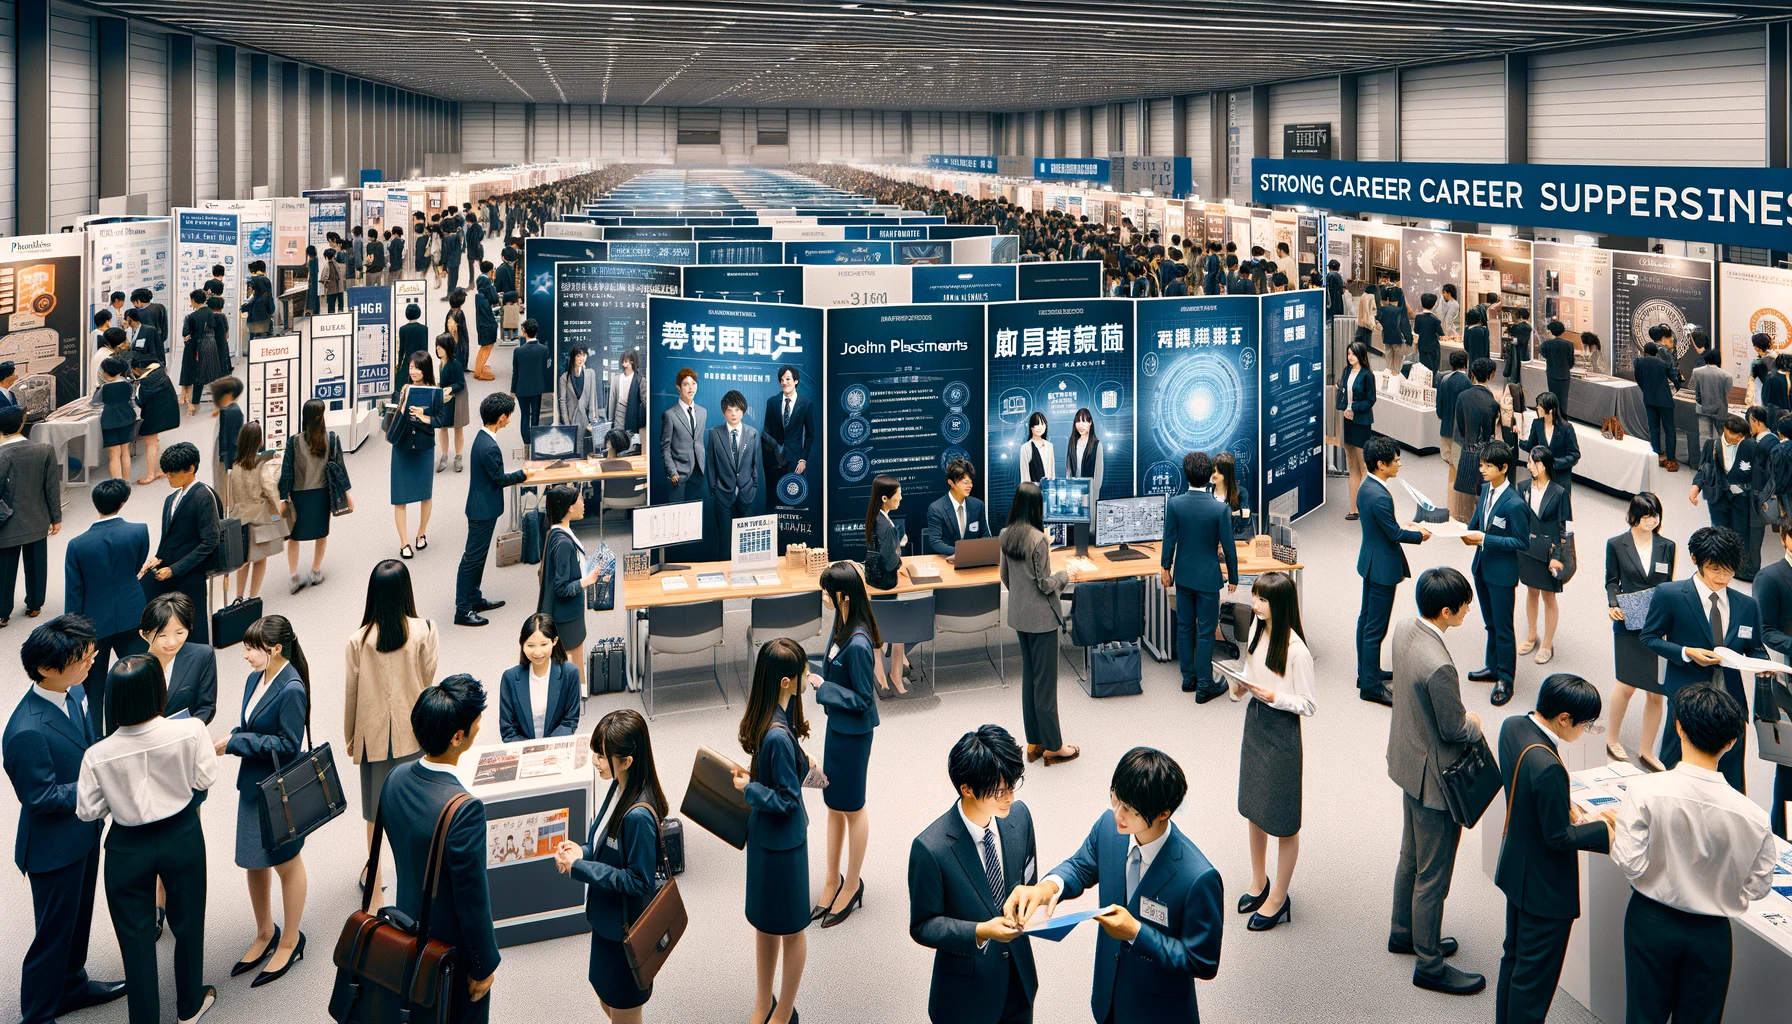 A professional and engaging scene at Musashi University in Japan, highlighting its strong career support services. The image depicts a career fair event on campus, with various corporate booths manned by representatives in business attire, and students in smart casual or business attire interacting with them. There are banners and displays about internship opportunities and job placements prominently featured. Students are seen engaging in discussions, handing out resumes, and networking. The setting is modern and well-organized, emphasizing the university's commitment to student career success and strong industry connections.